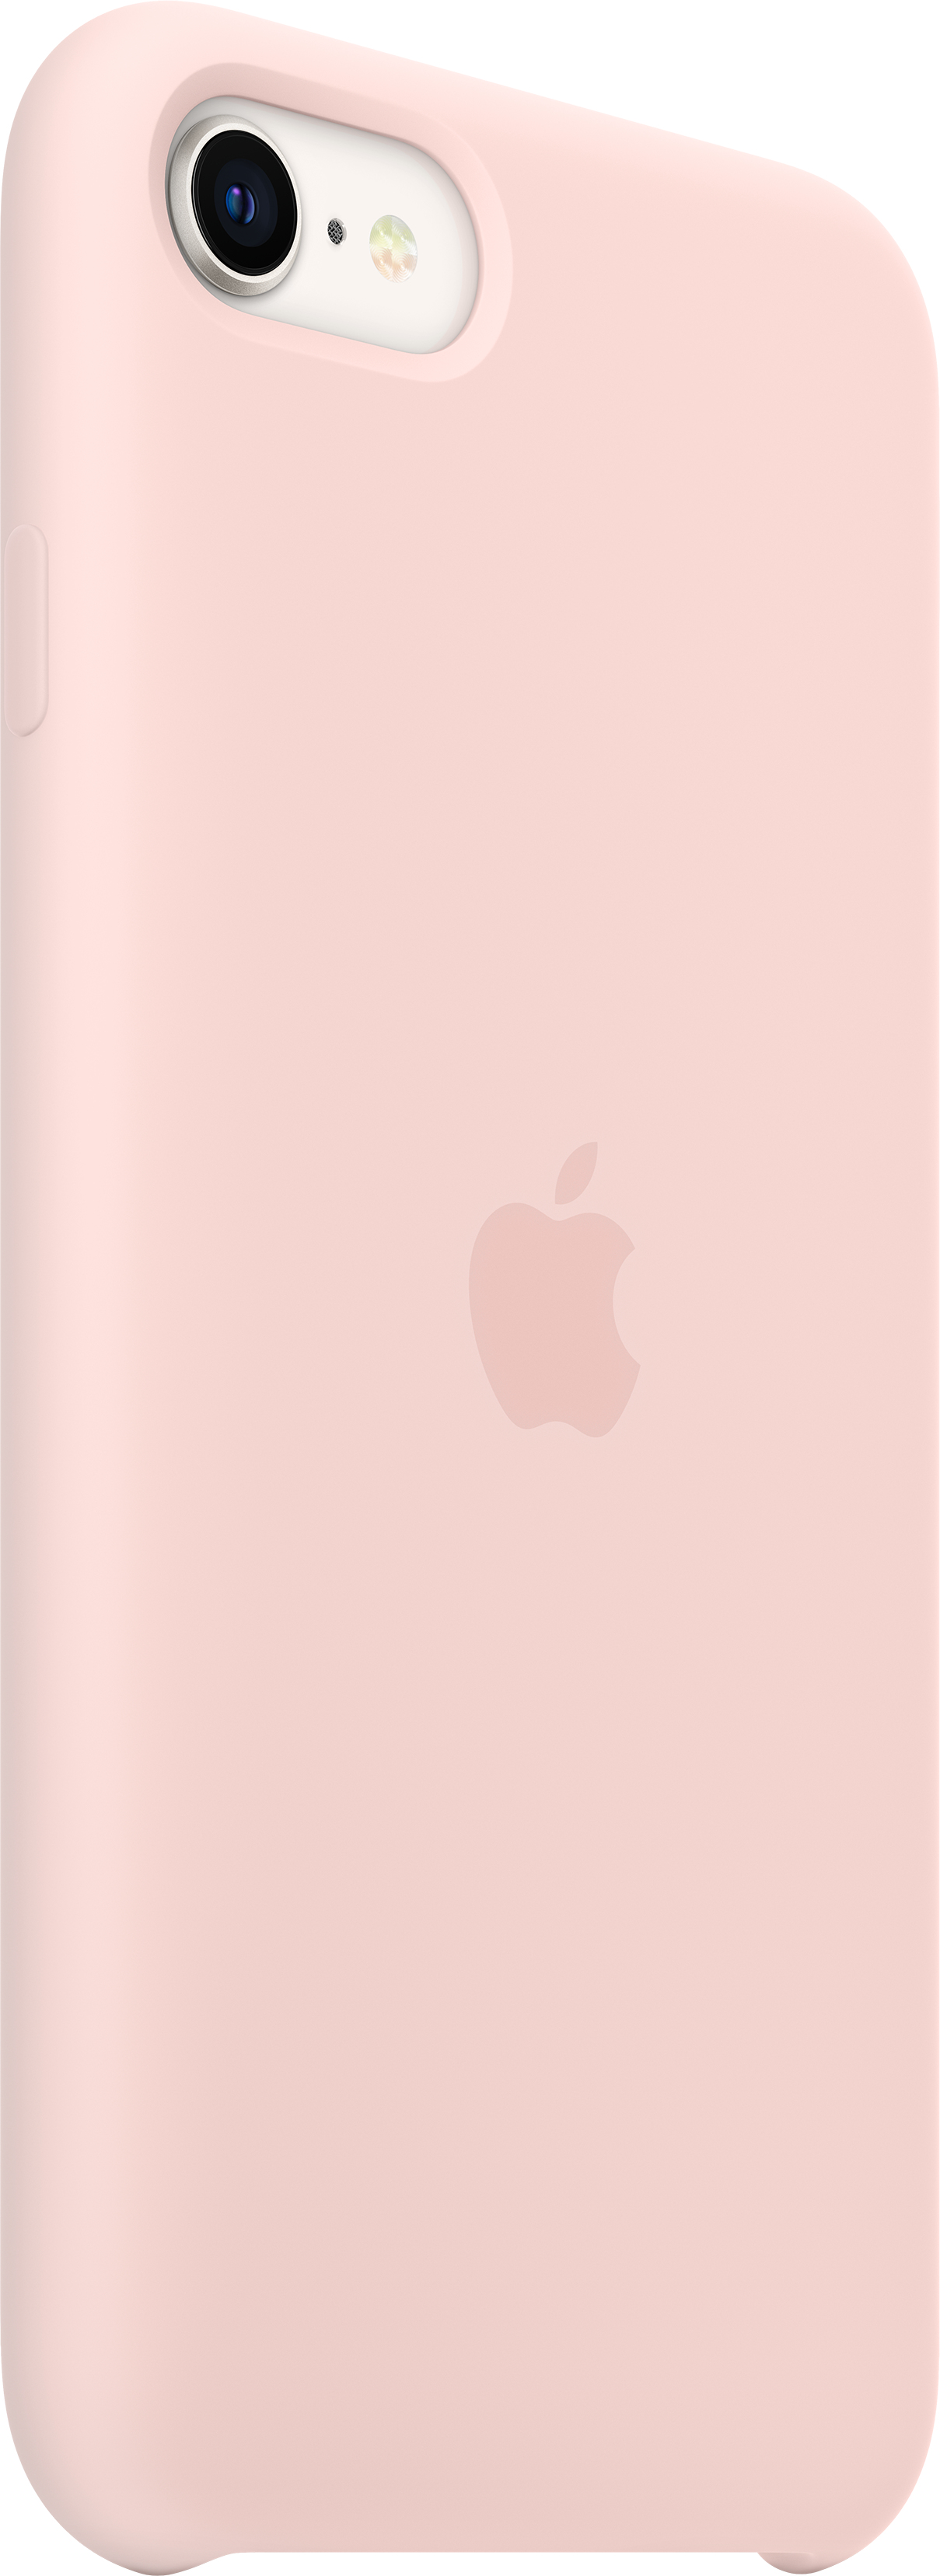 Apple iPhone SE Silicone Case - Chalk Pink